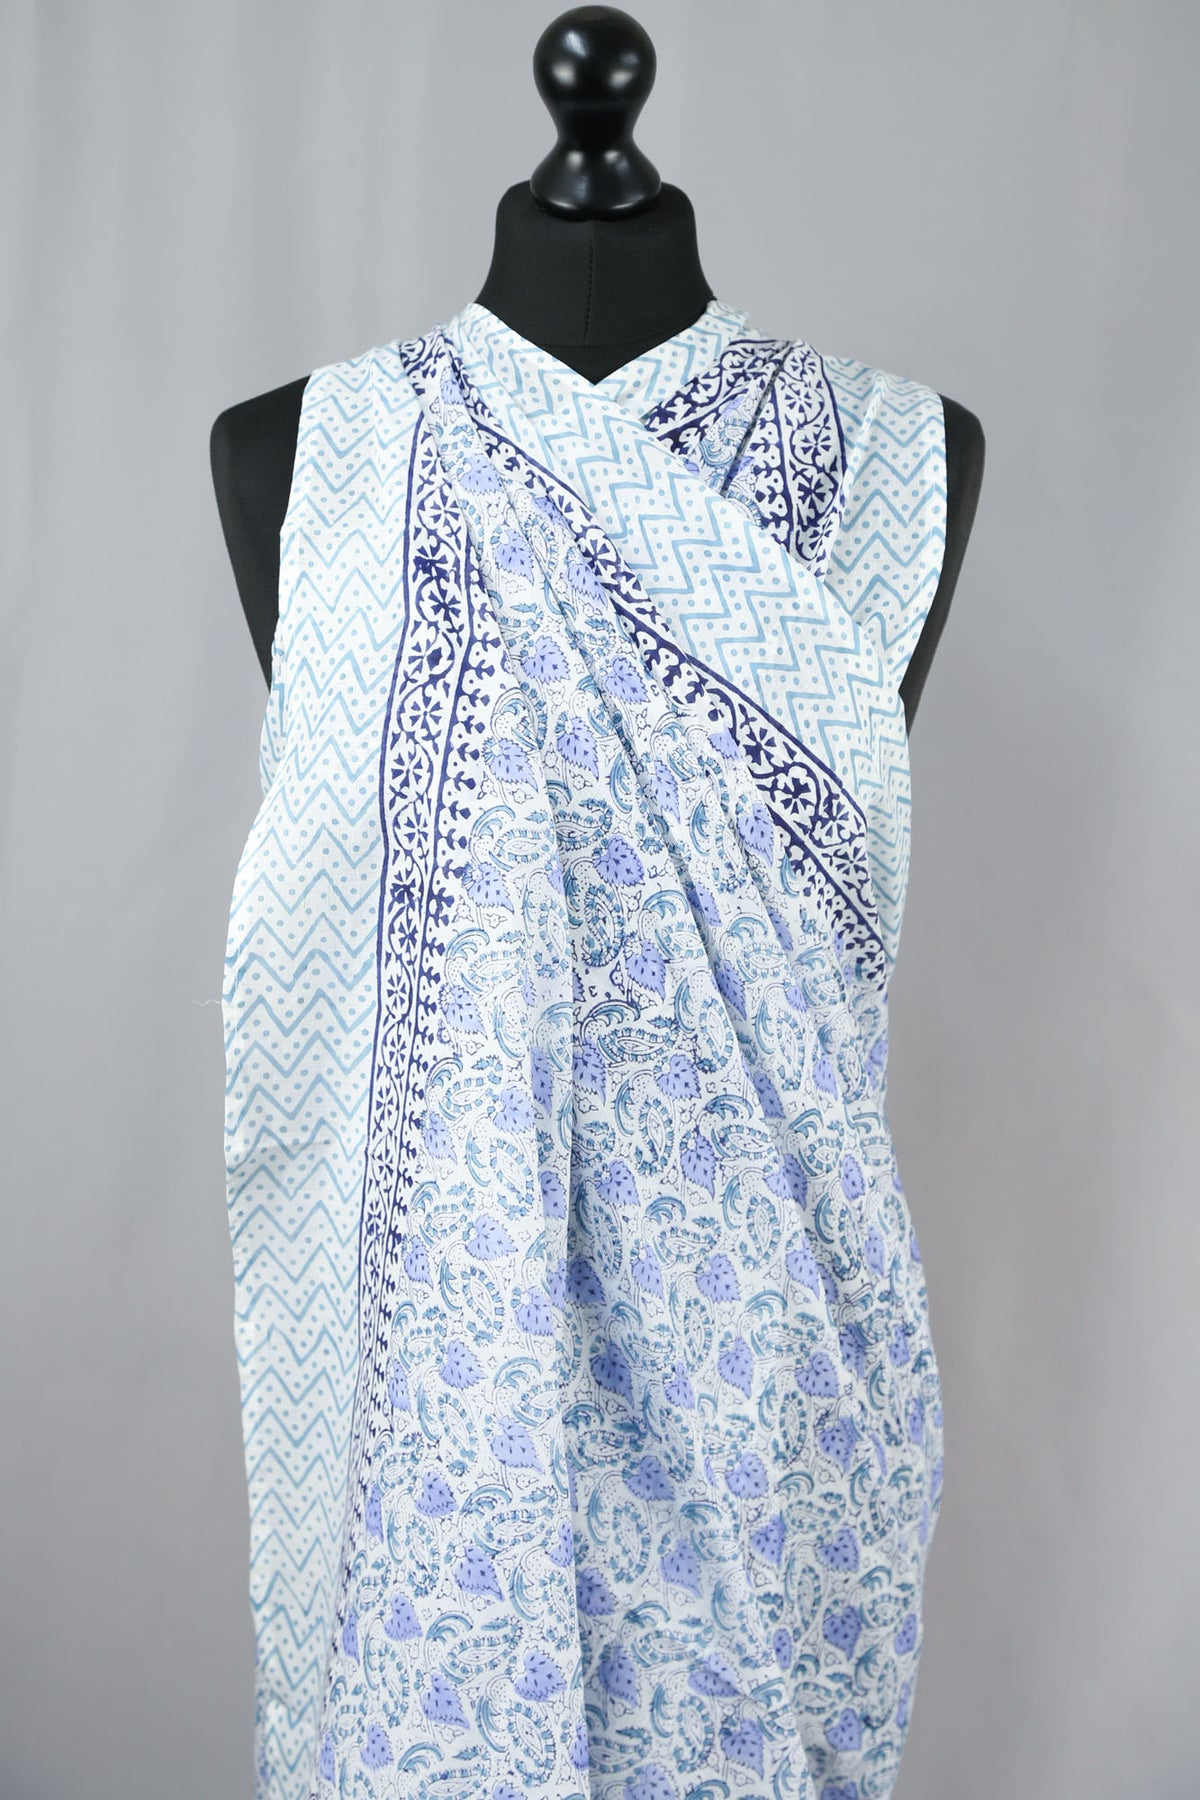 Beach Coverup Sarong Pareo - Blue Leaves